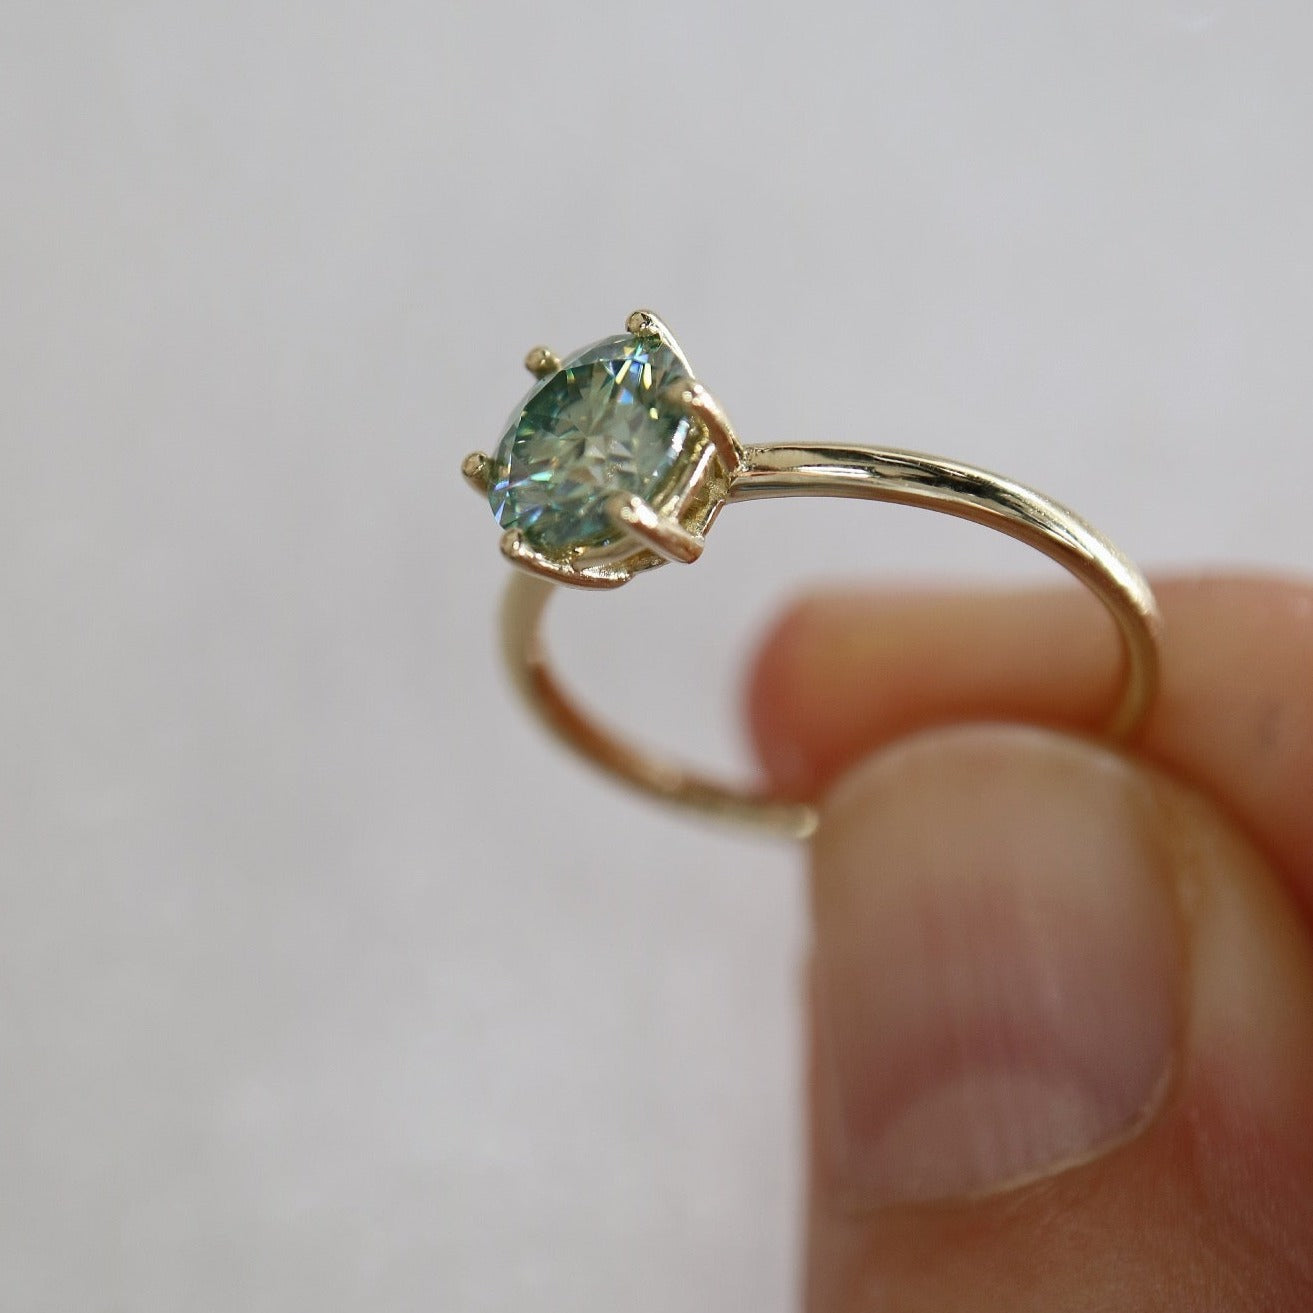 Solid gold and blue moissanite ring